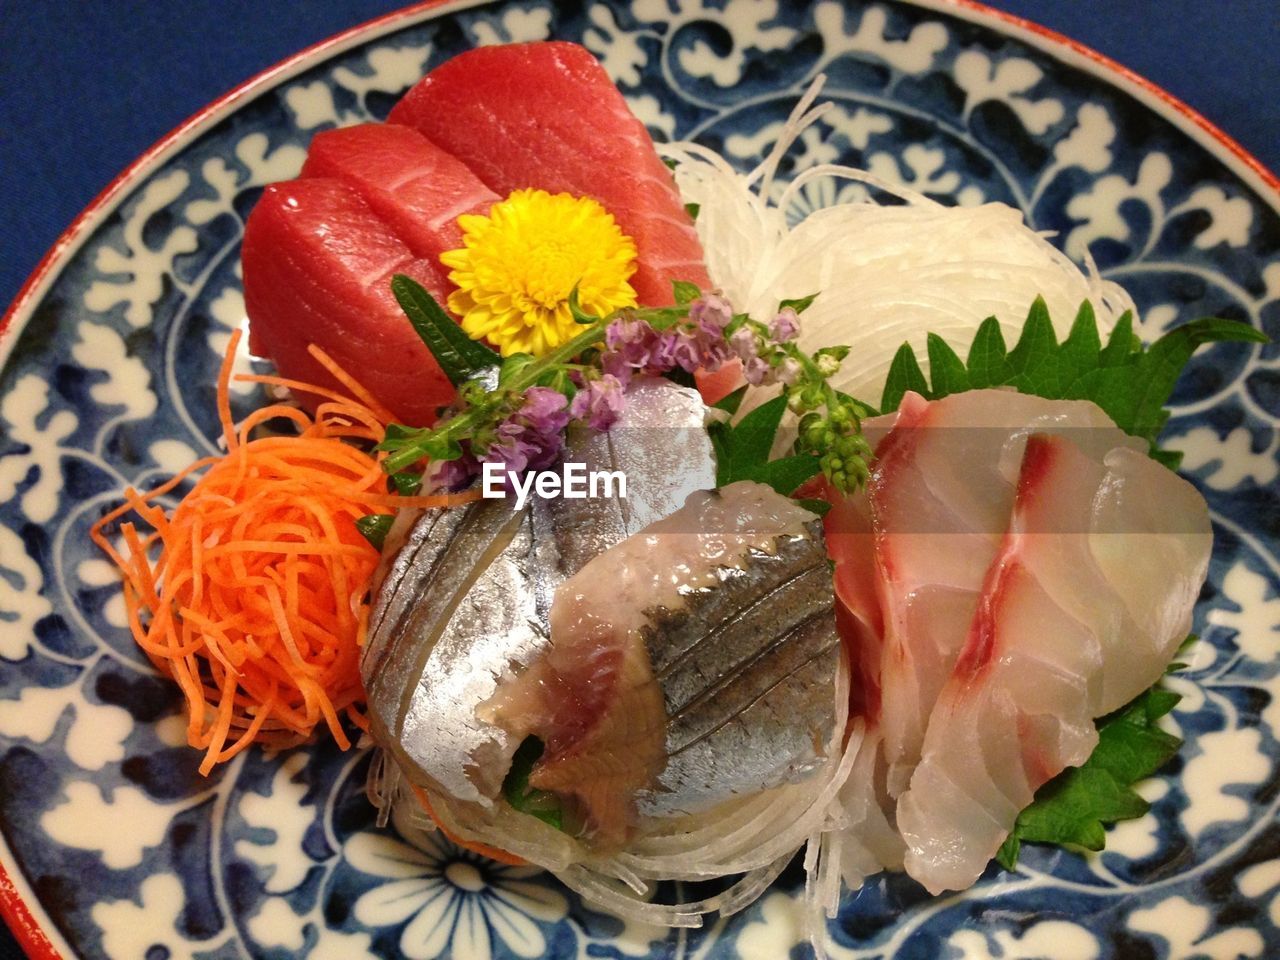 Raw fish on plate